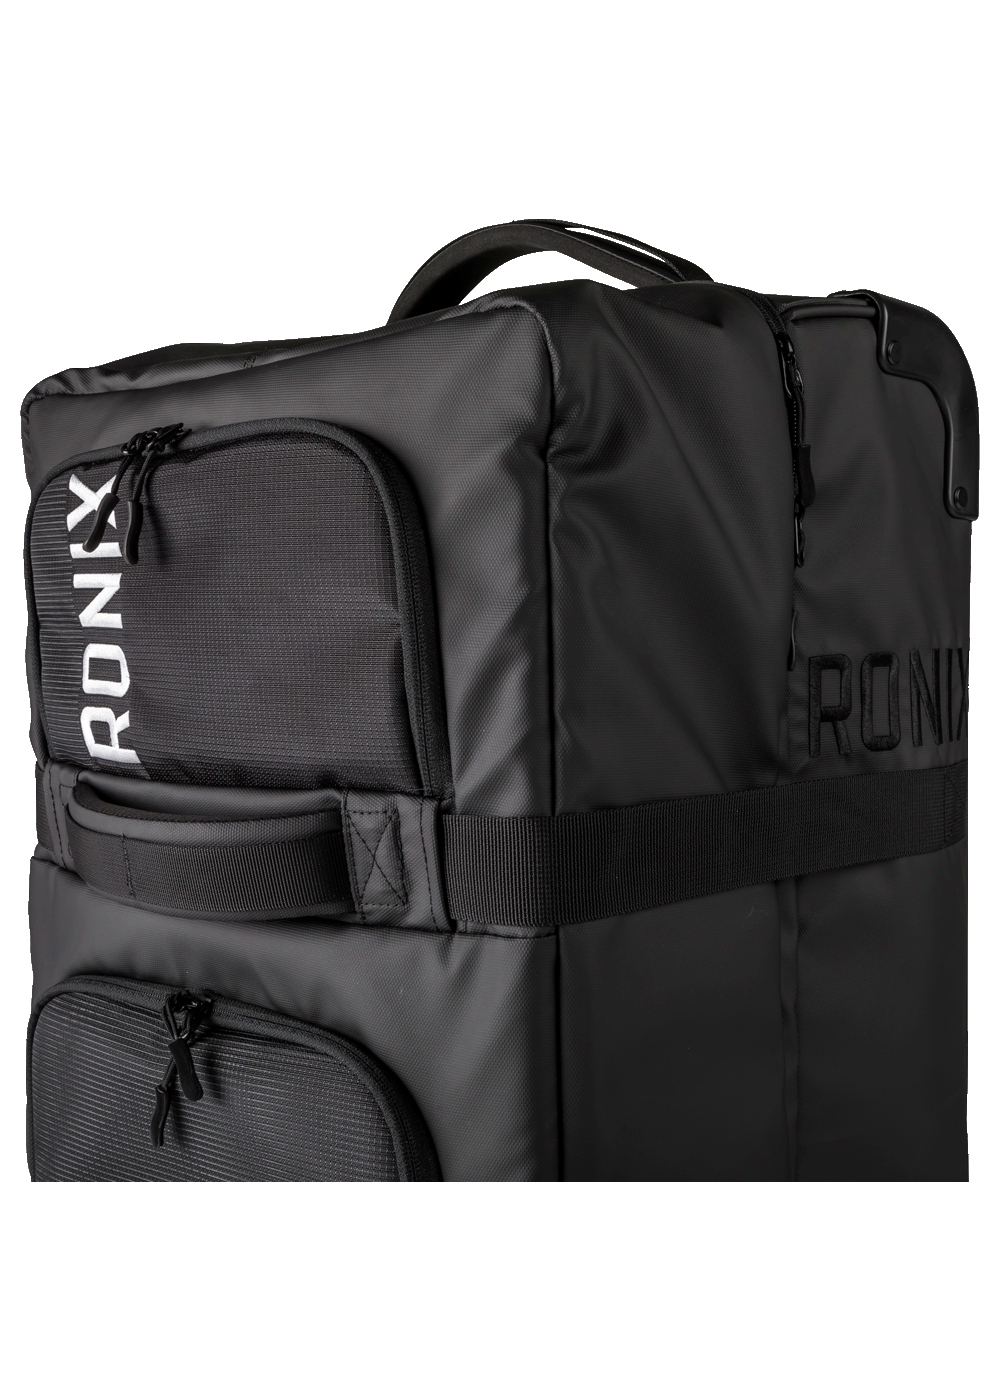 2022 Ronix Bags Transfer Travel Luggage Inset 3 copy